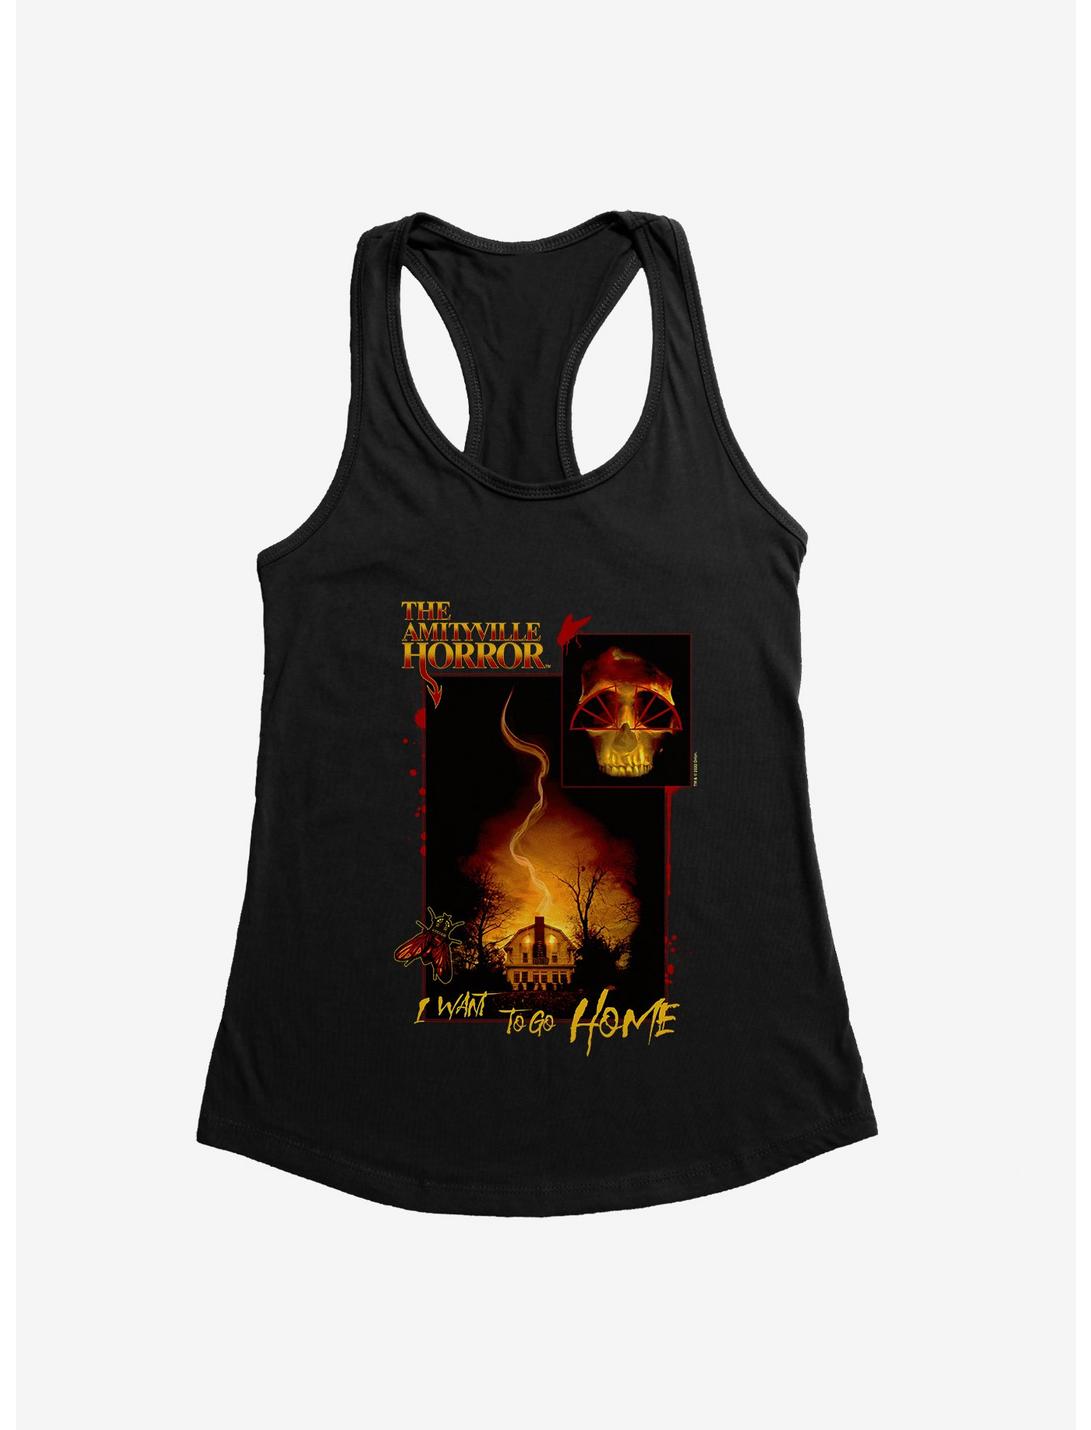 The Amityville Horror I Want To Go Home Girls Tank, BLACK, hi-res